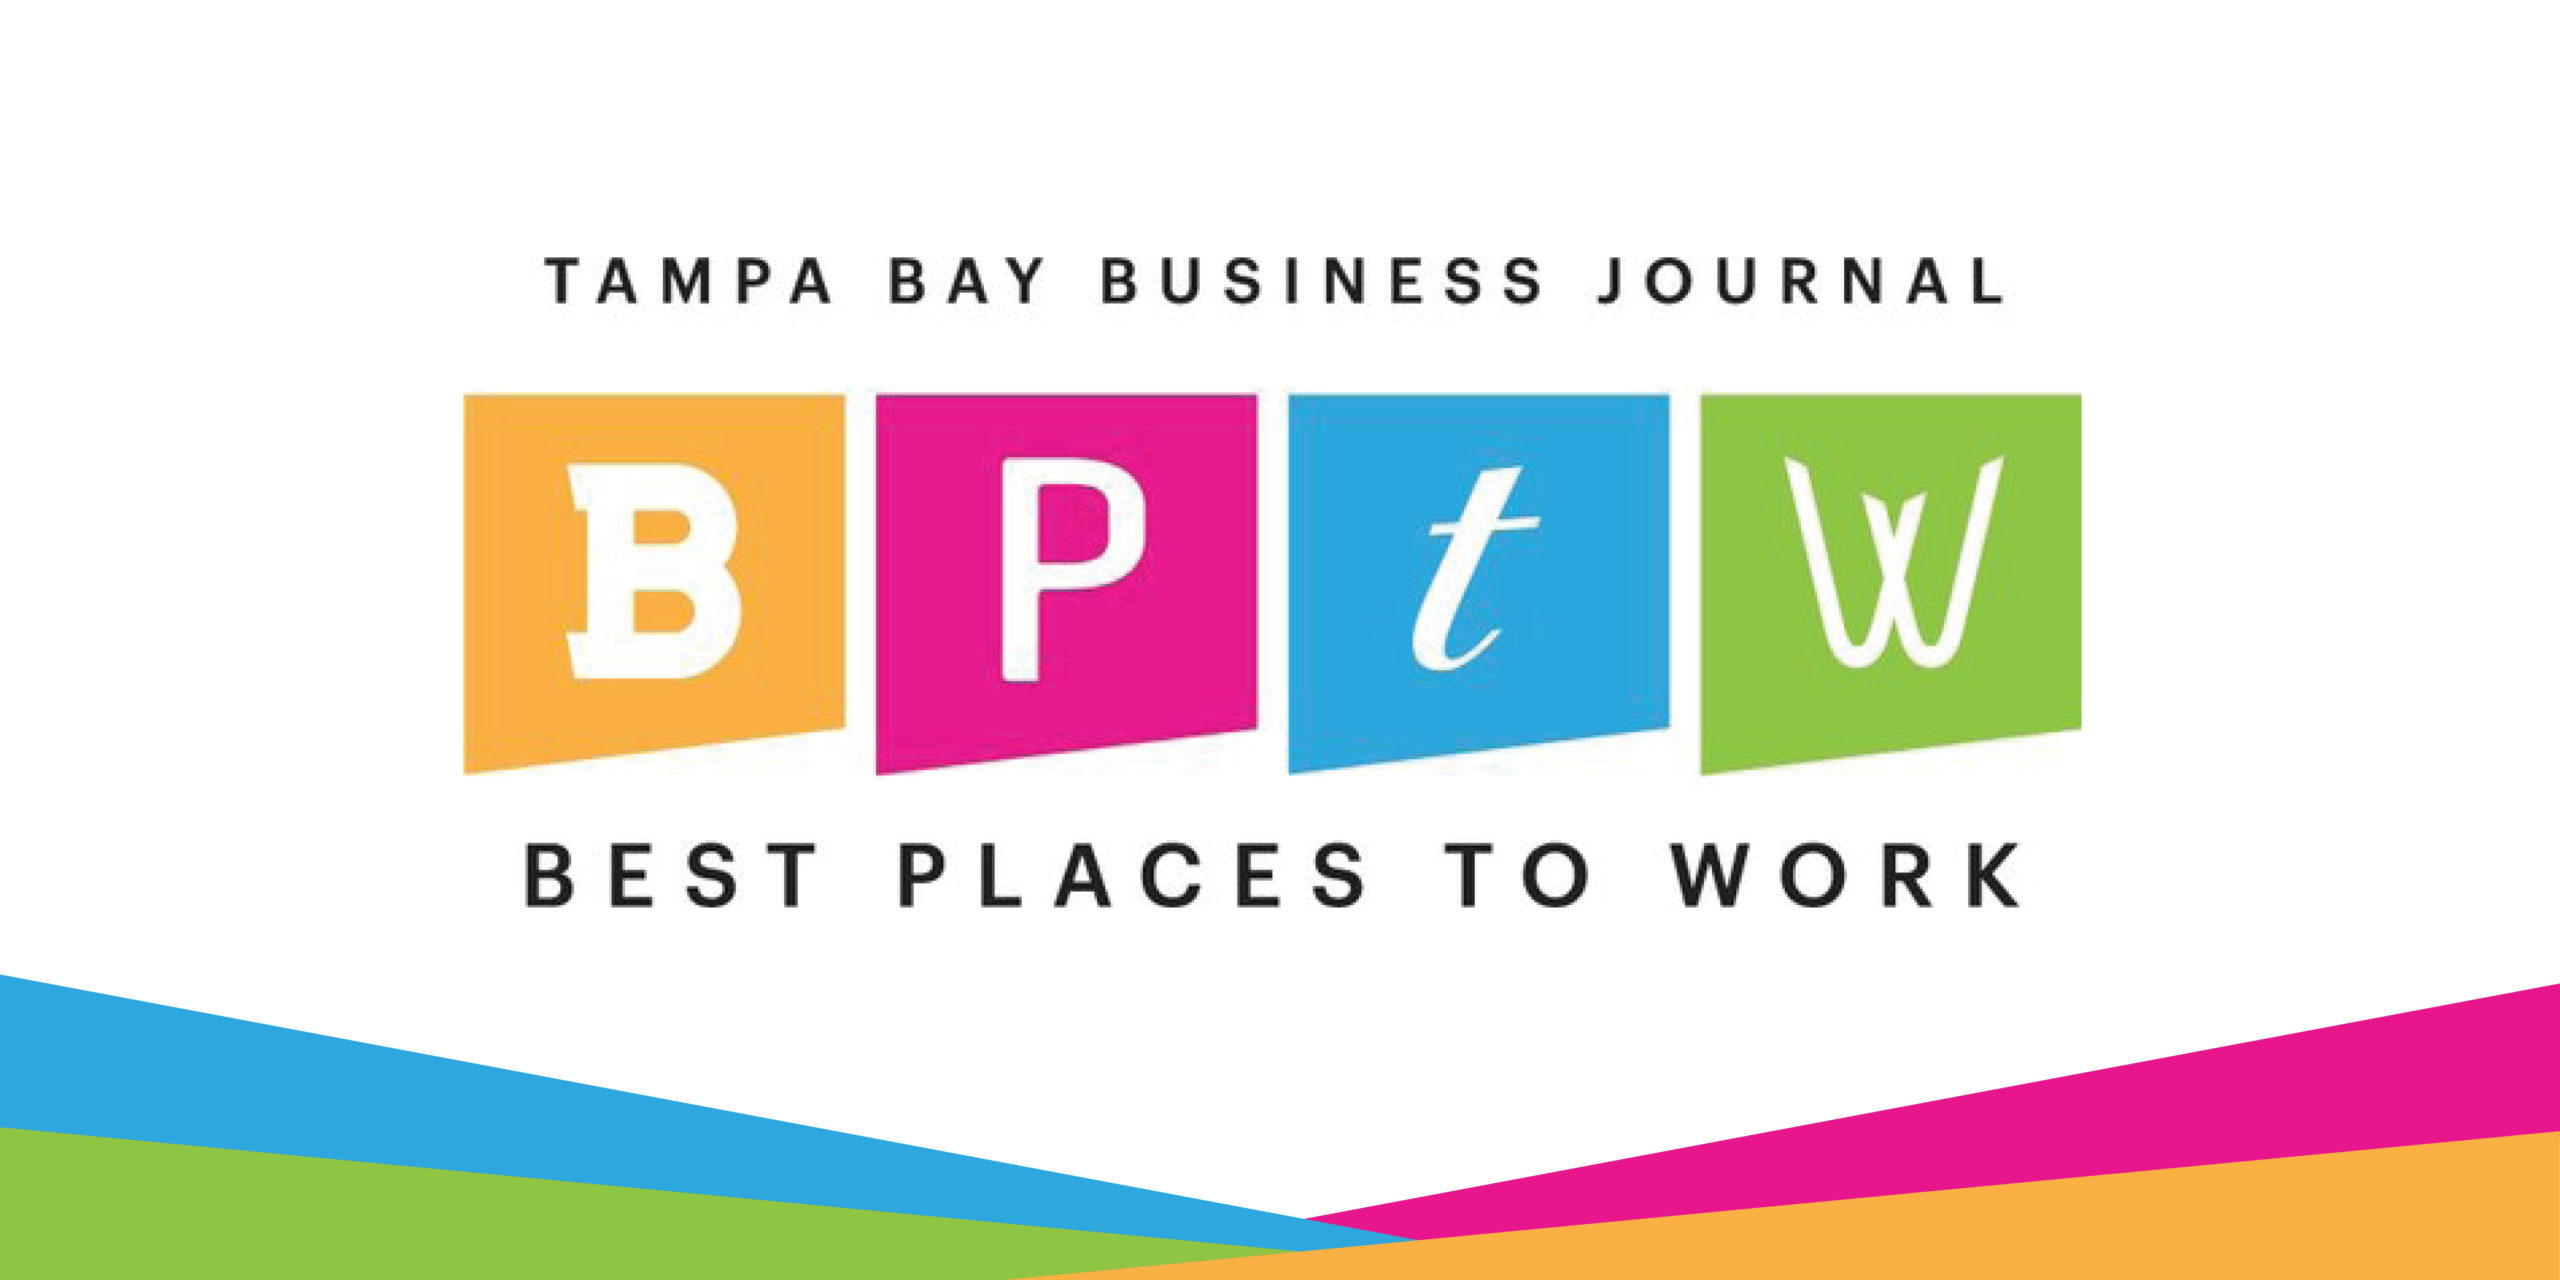 Homeowners is a 4x Best Place To Work in Tampa Bay